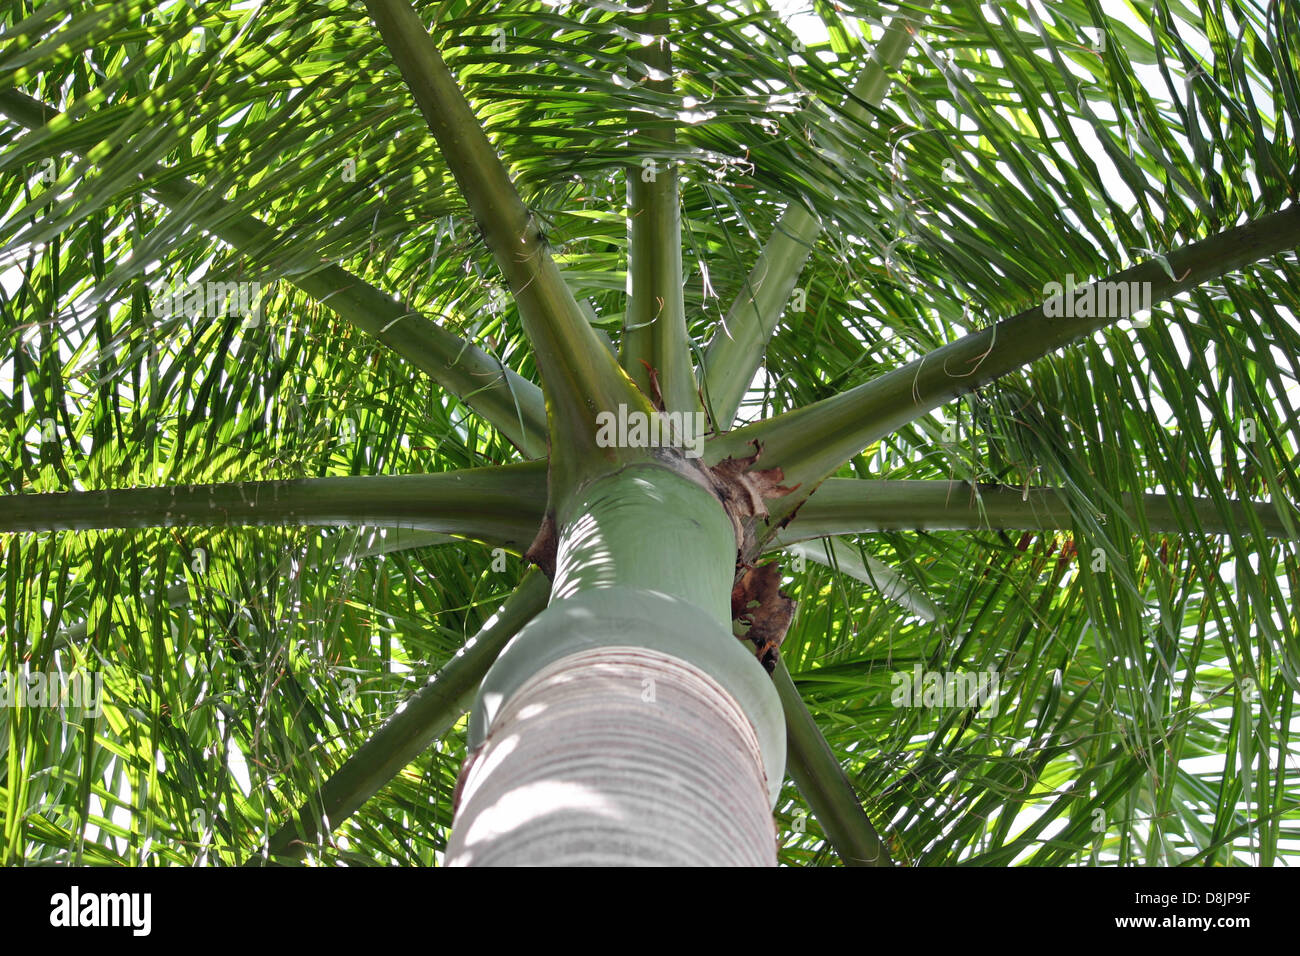 A pretty palm tree taken from a low angle Stock Photo